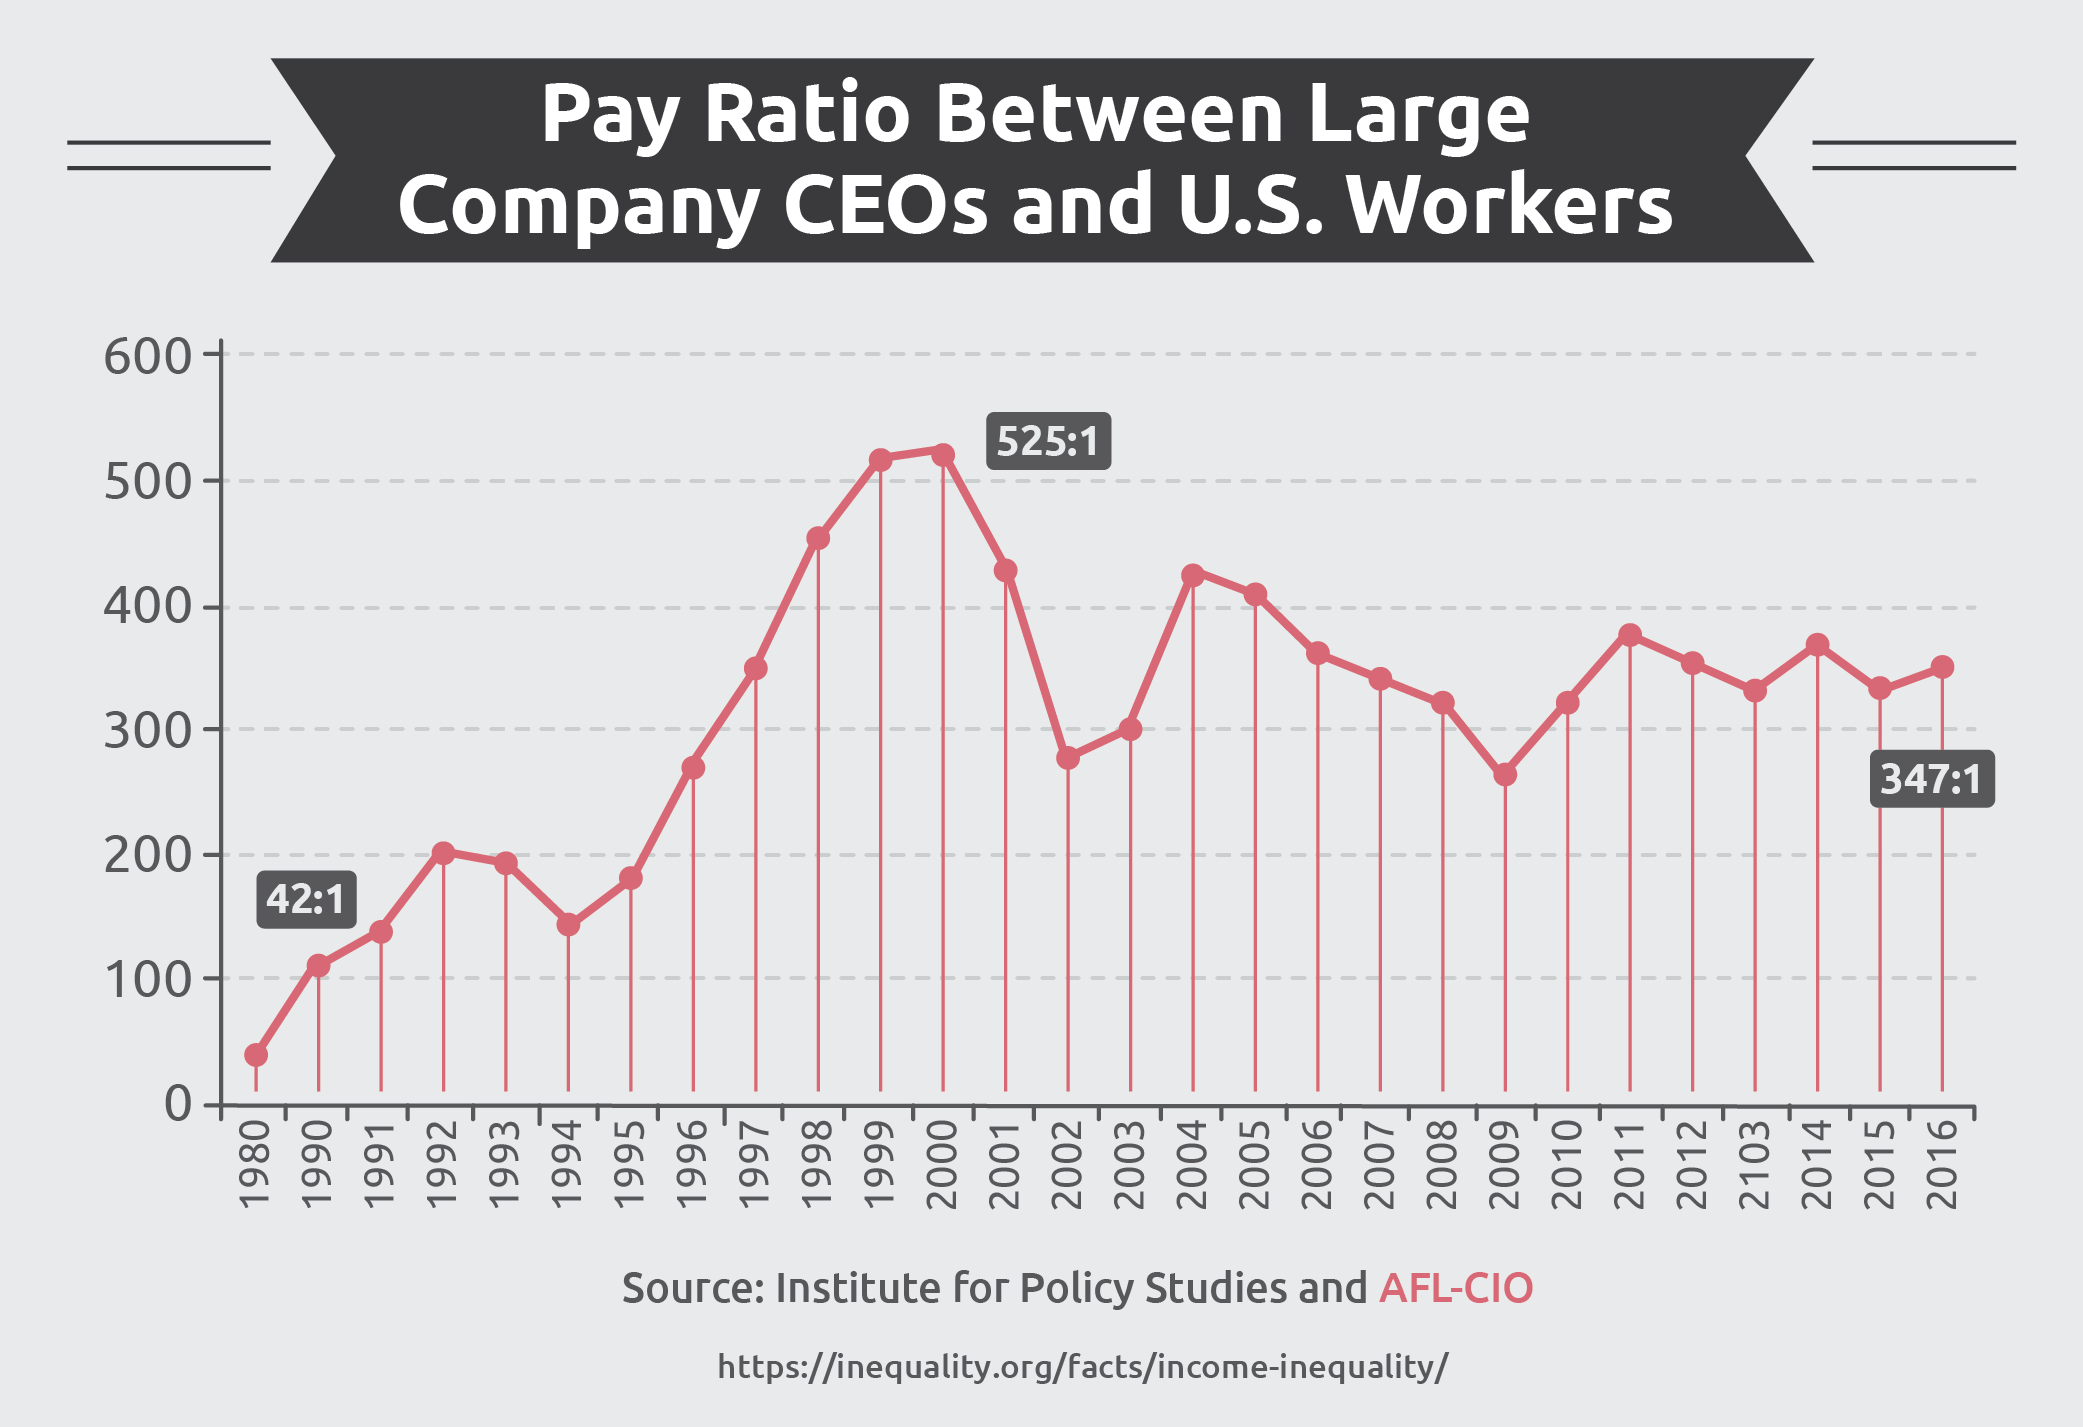 Pay Ratio Between Large Company CEOs and U.S. Workers